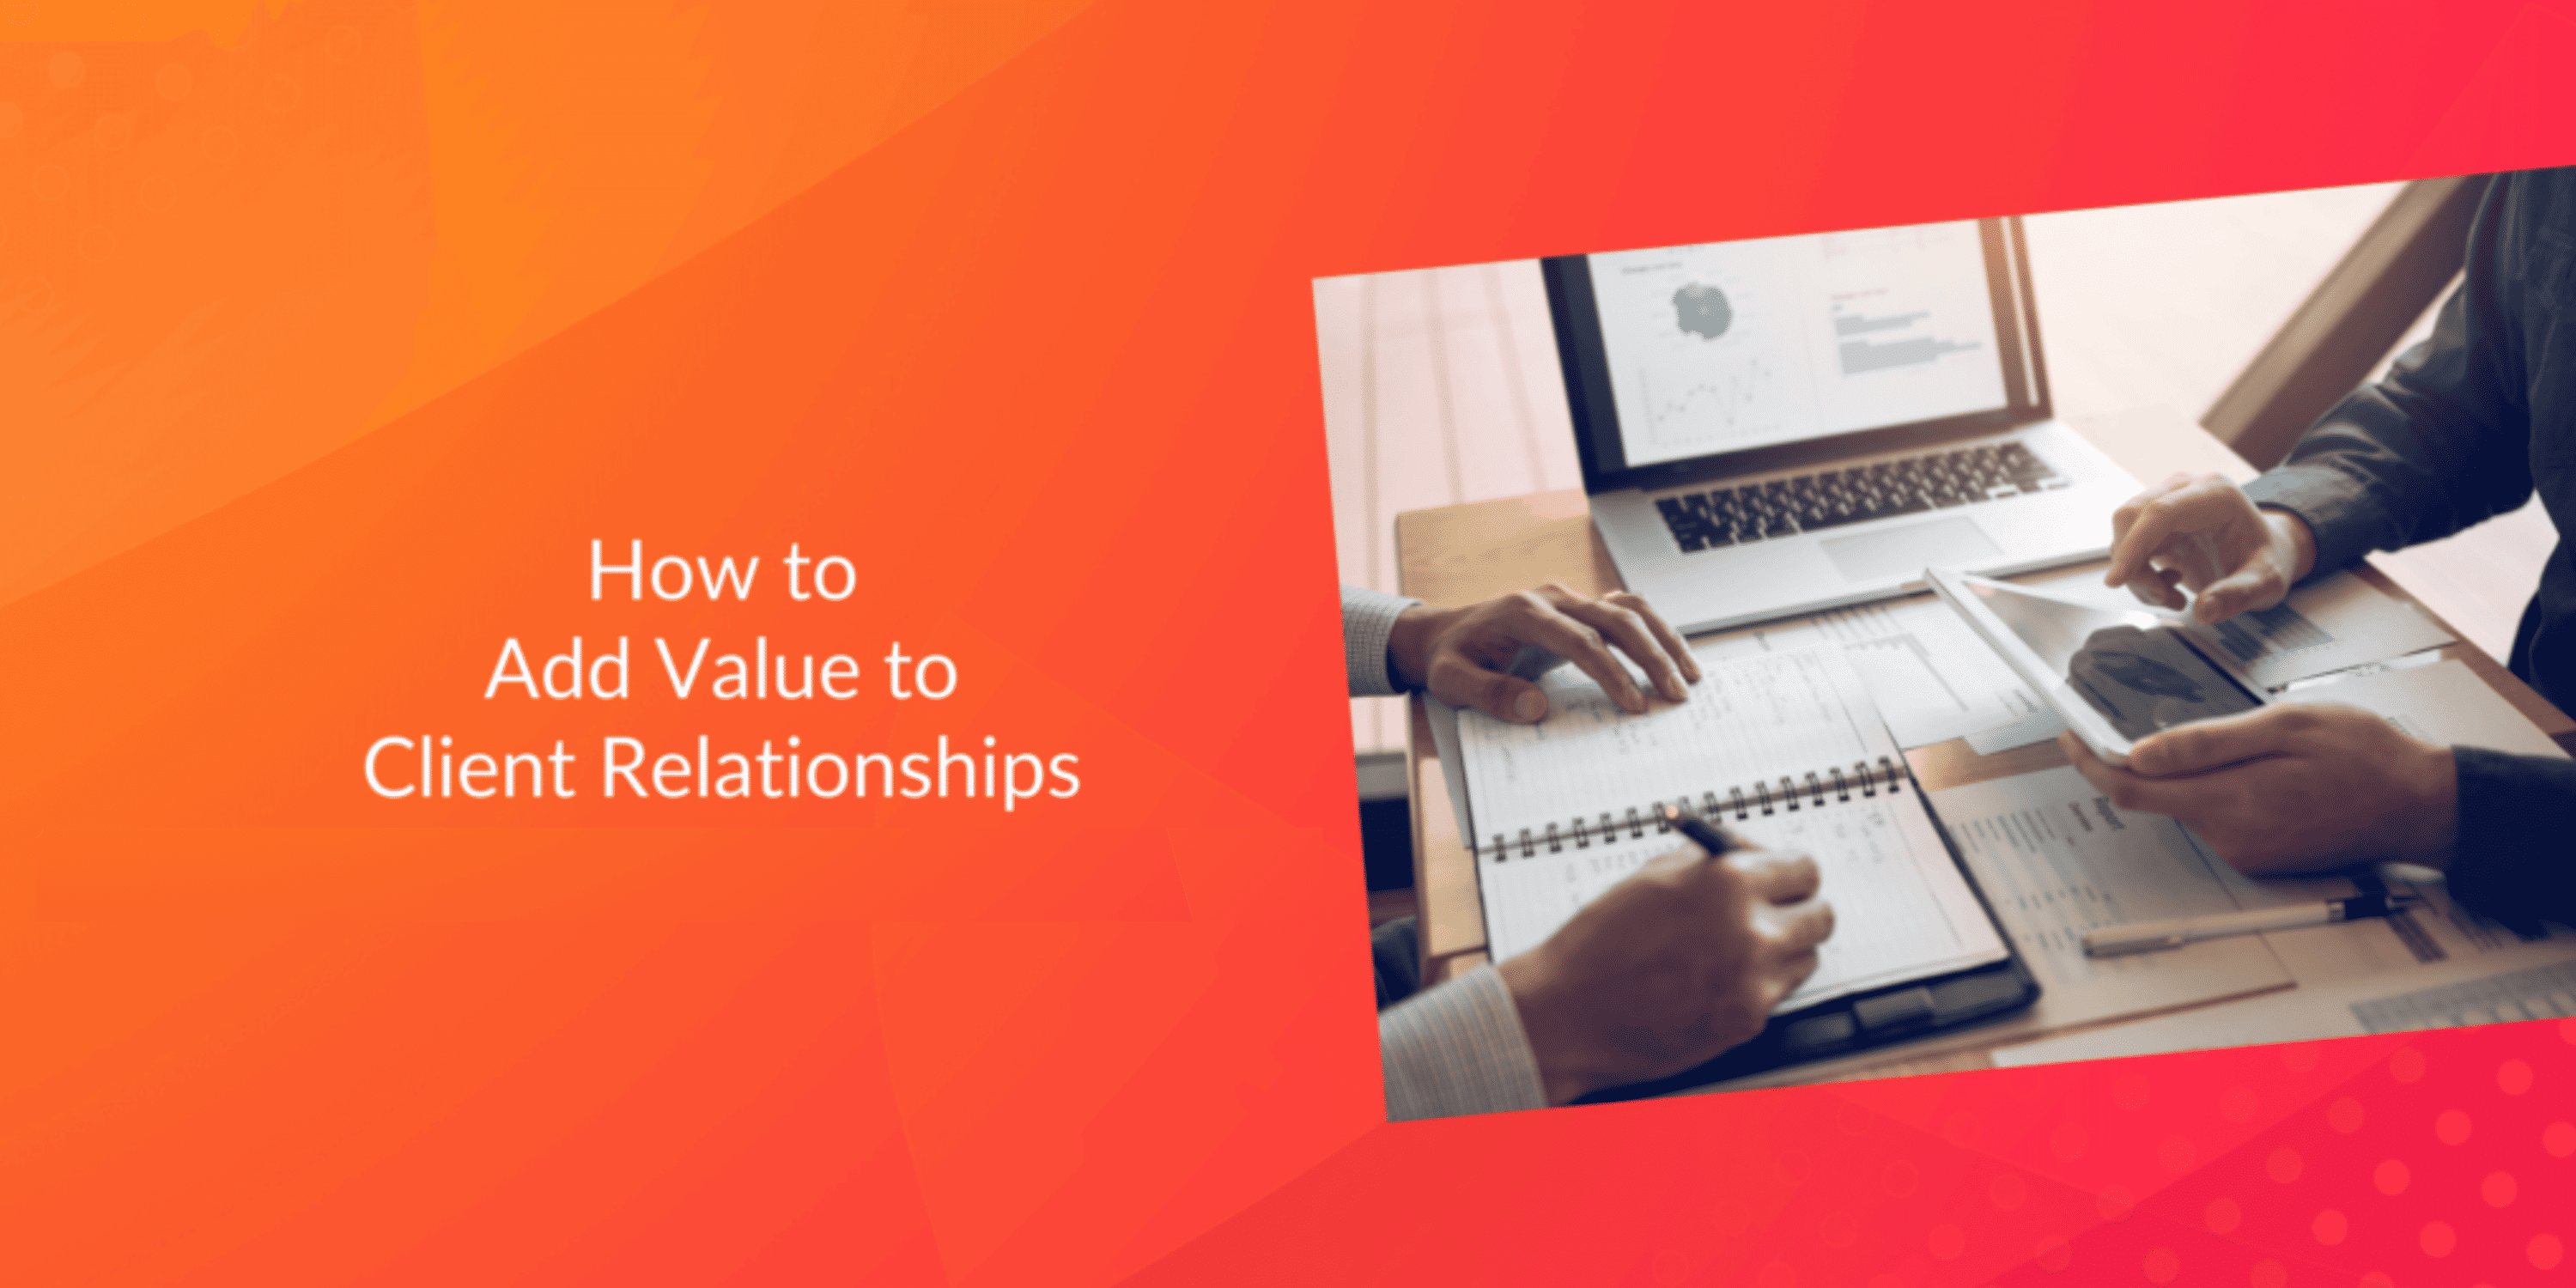 How to Add Value to Client Relationships